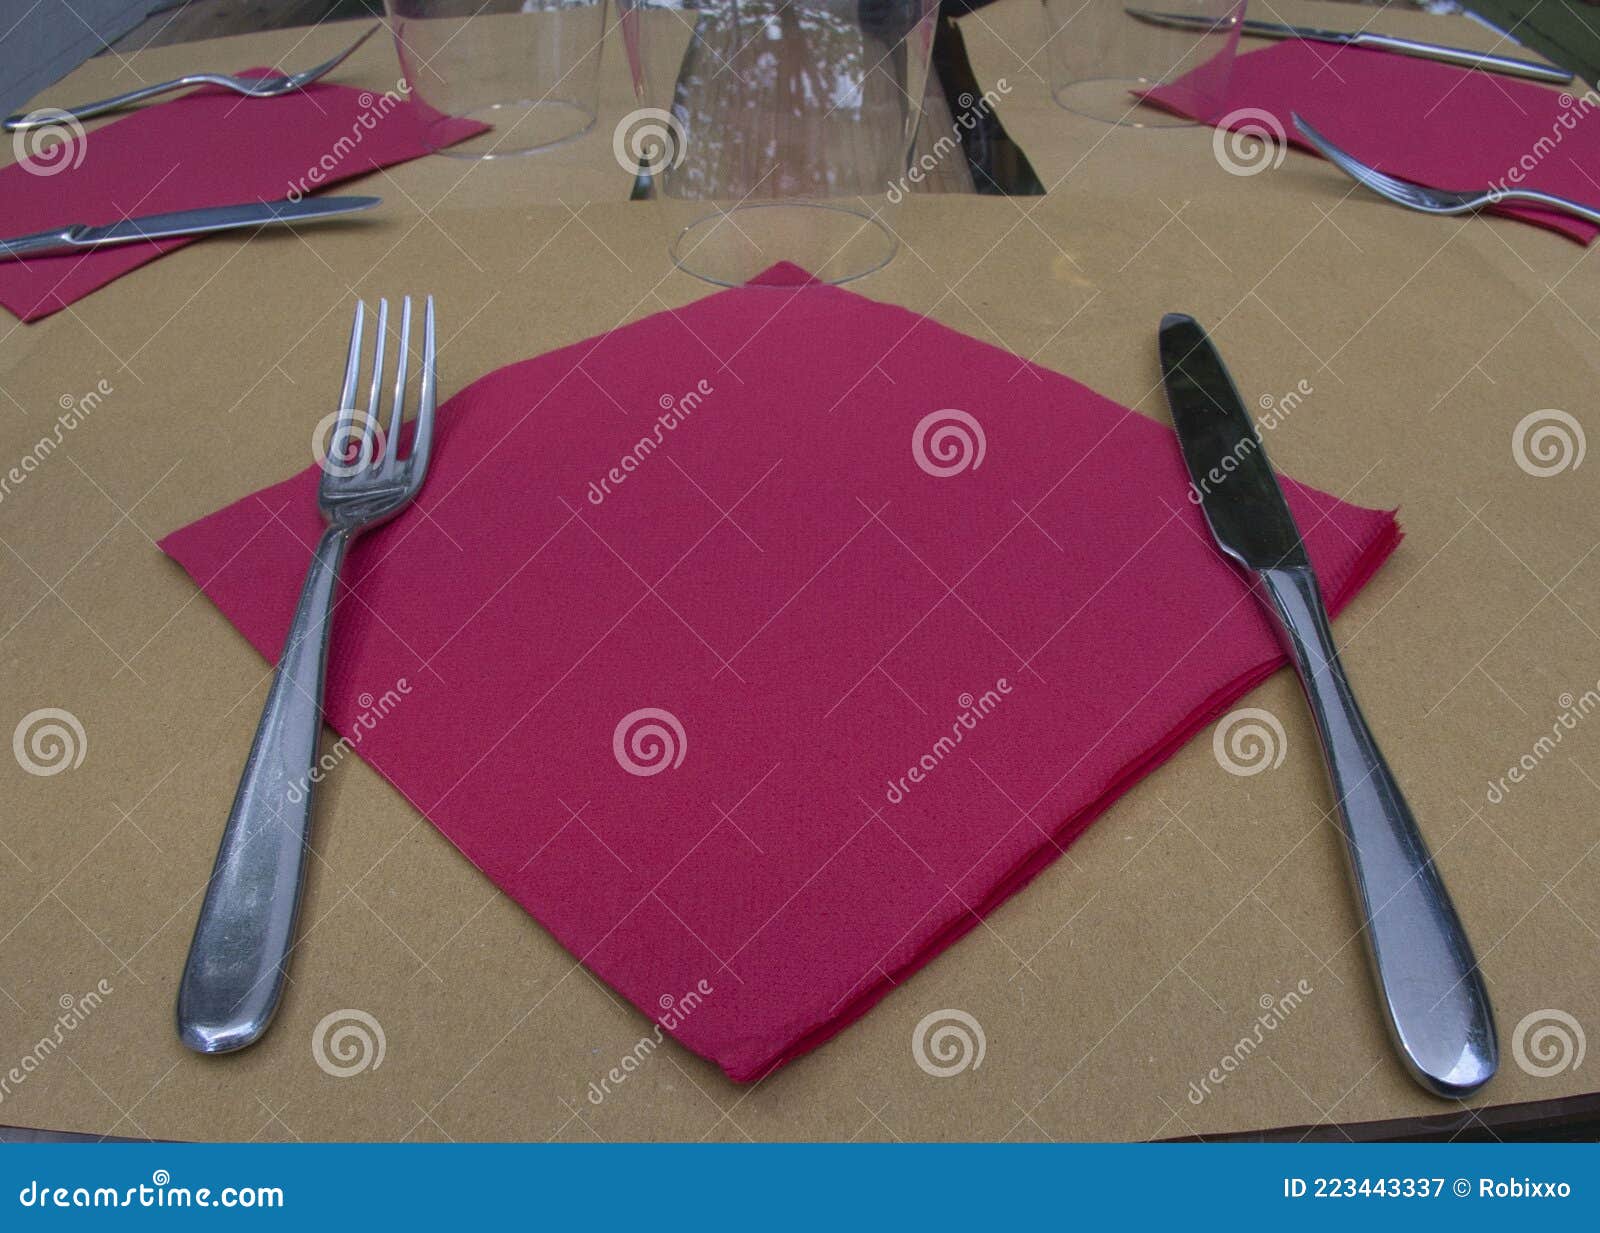 table in a restaurant set for a candlelit dinner